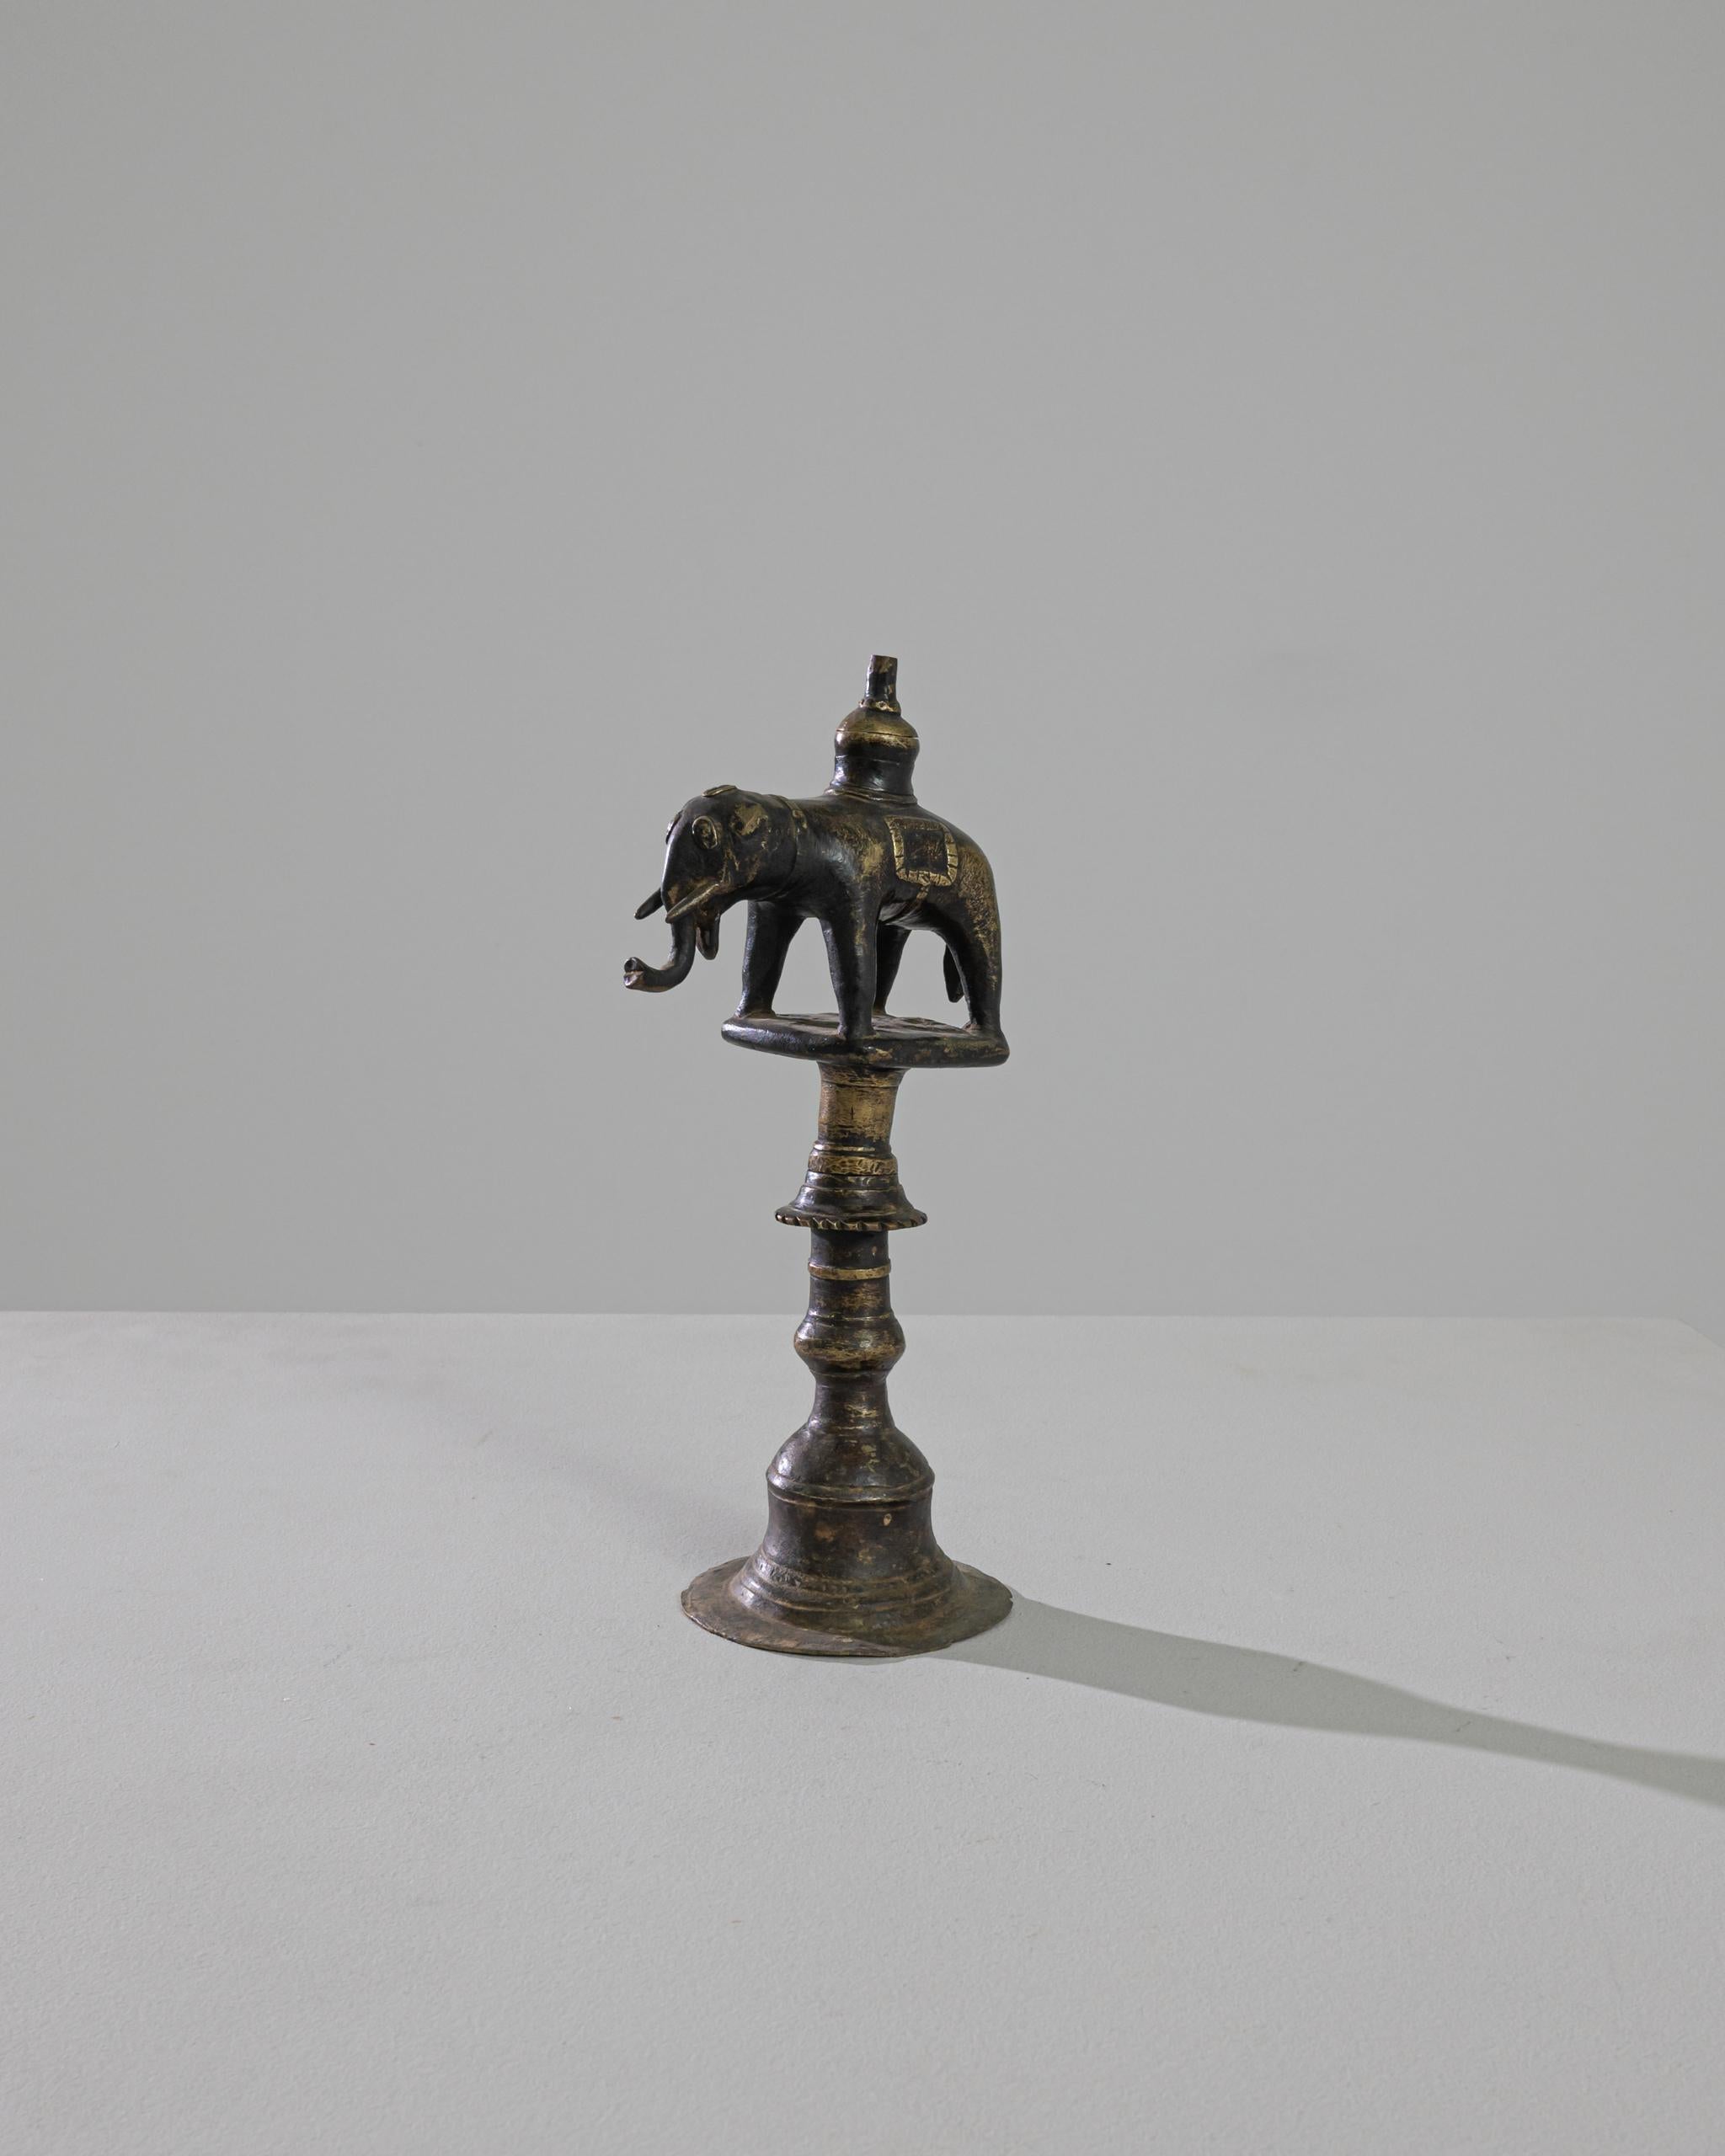 A brass oil lamp from Tibet, this piece displays a little elephant on top of an ornamented column resembling a bell. Eyes covered and mounted by a lamp chimney, the elephant leans his tusks forward, ready to trumpet with force. The authentic patina